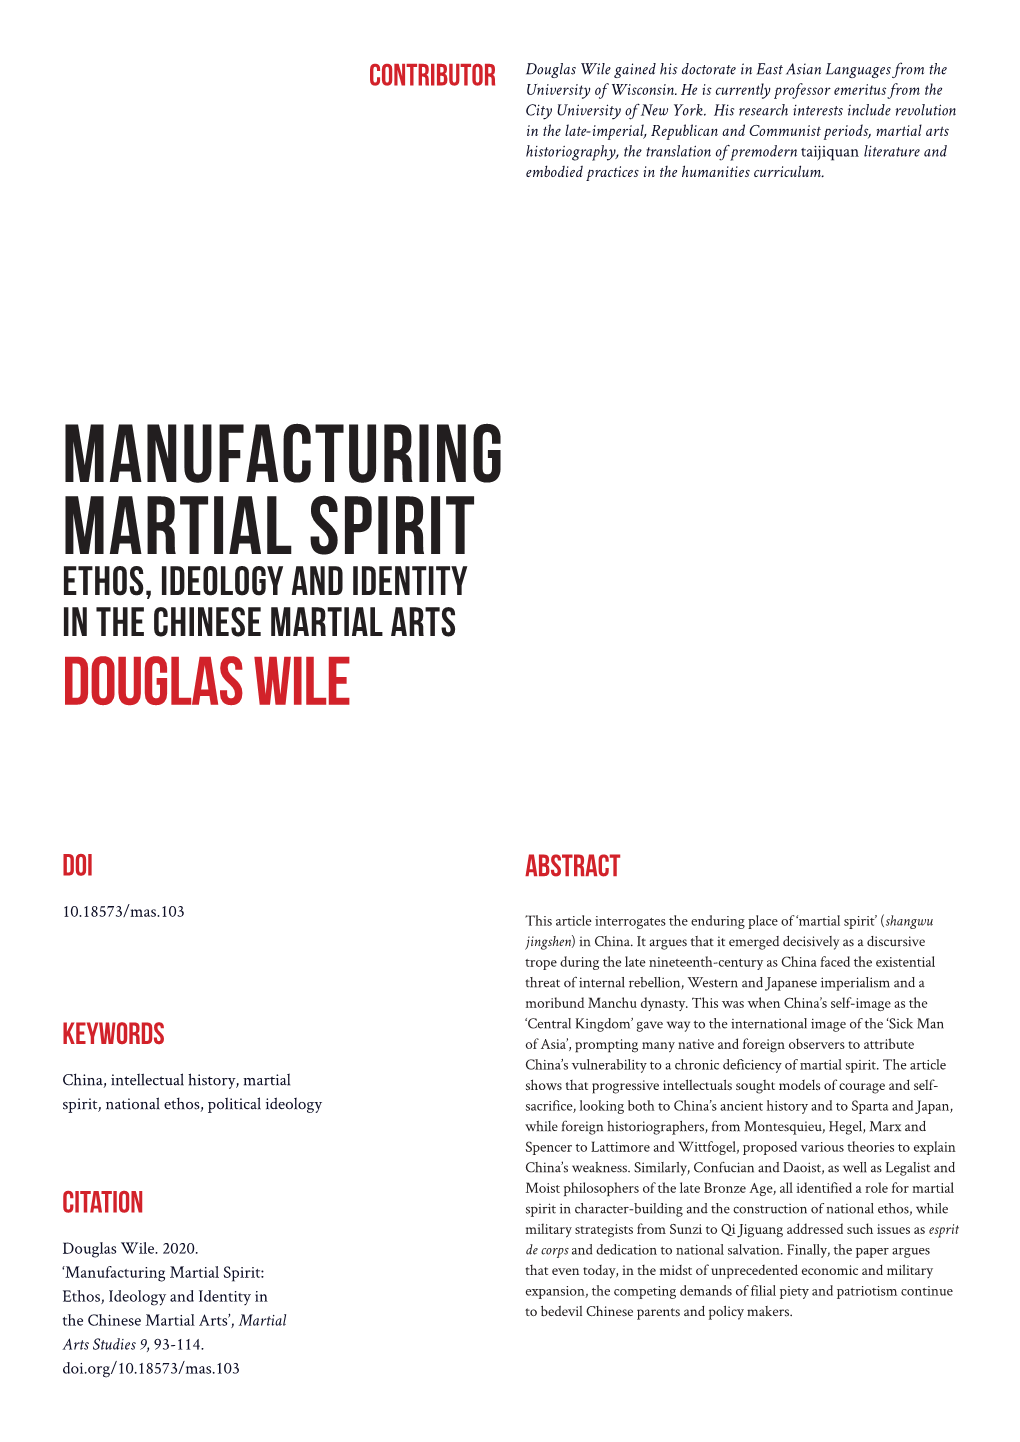 Manufacturing Martial Spirit Ethos, Ideology and Identity in the Chinese Martial Arts Douglas Wile